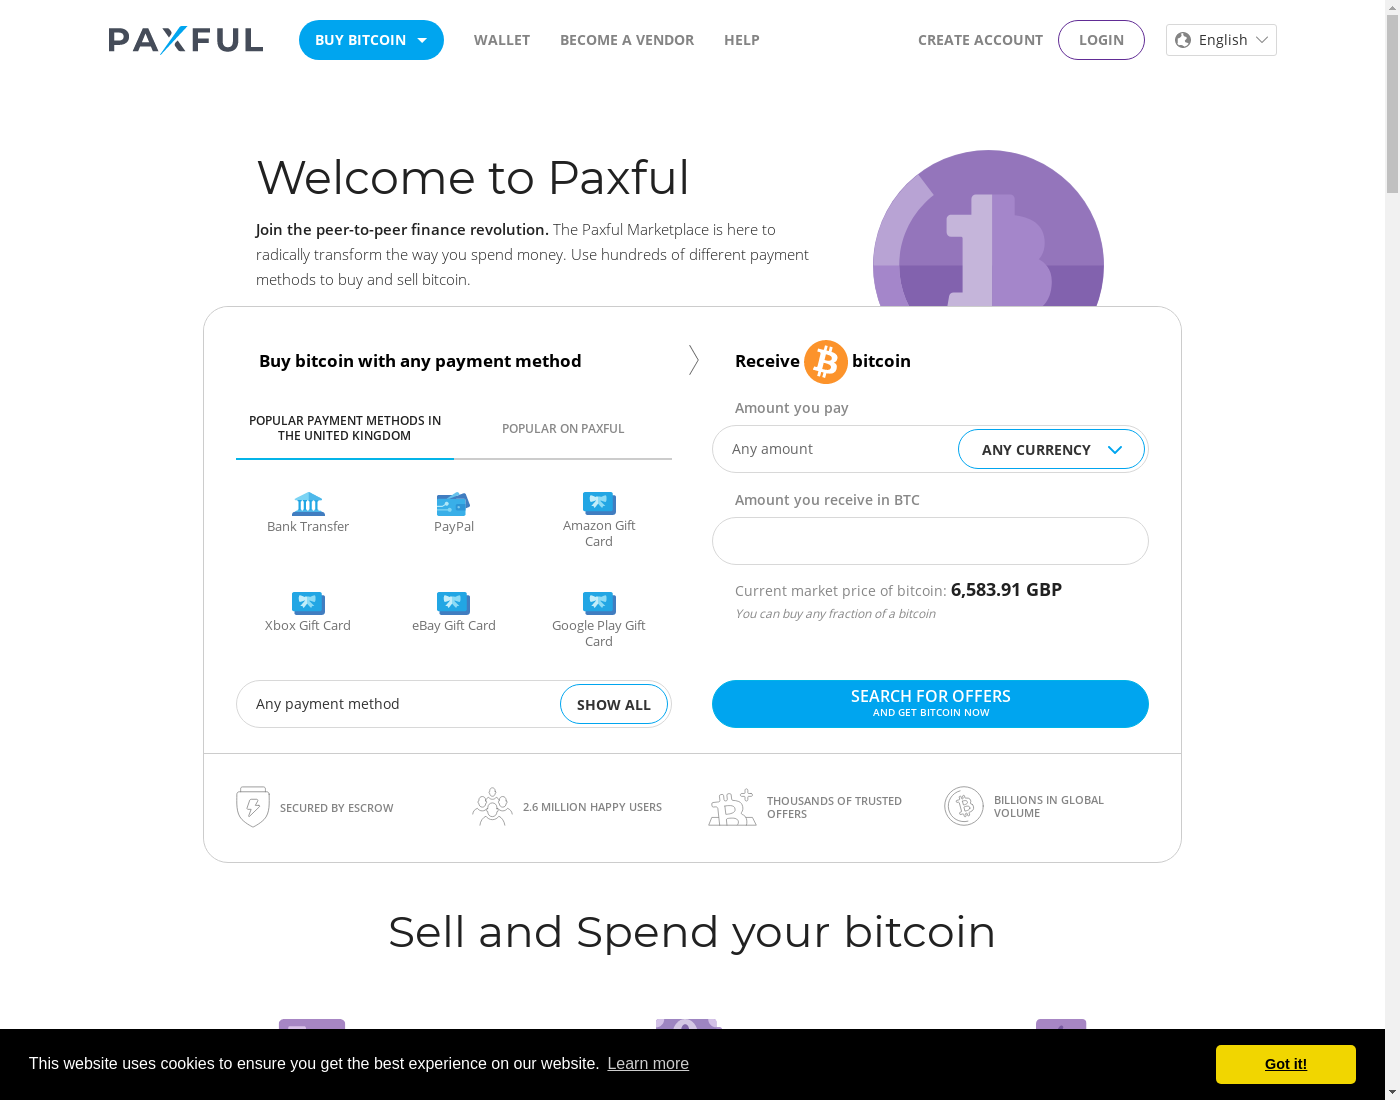 Paxful website: the home page in English